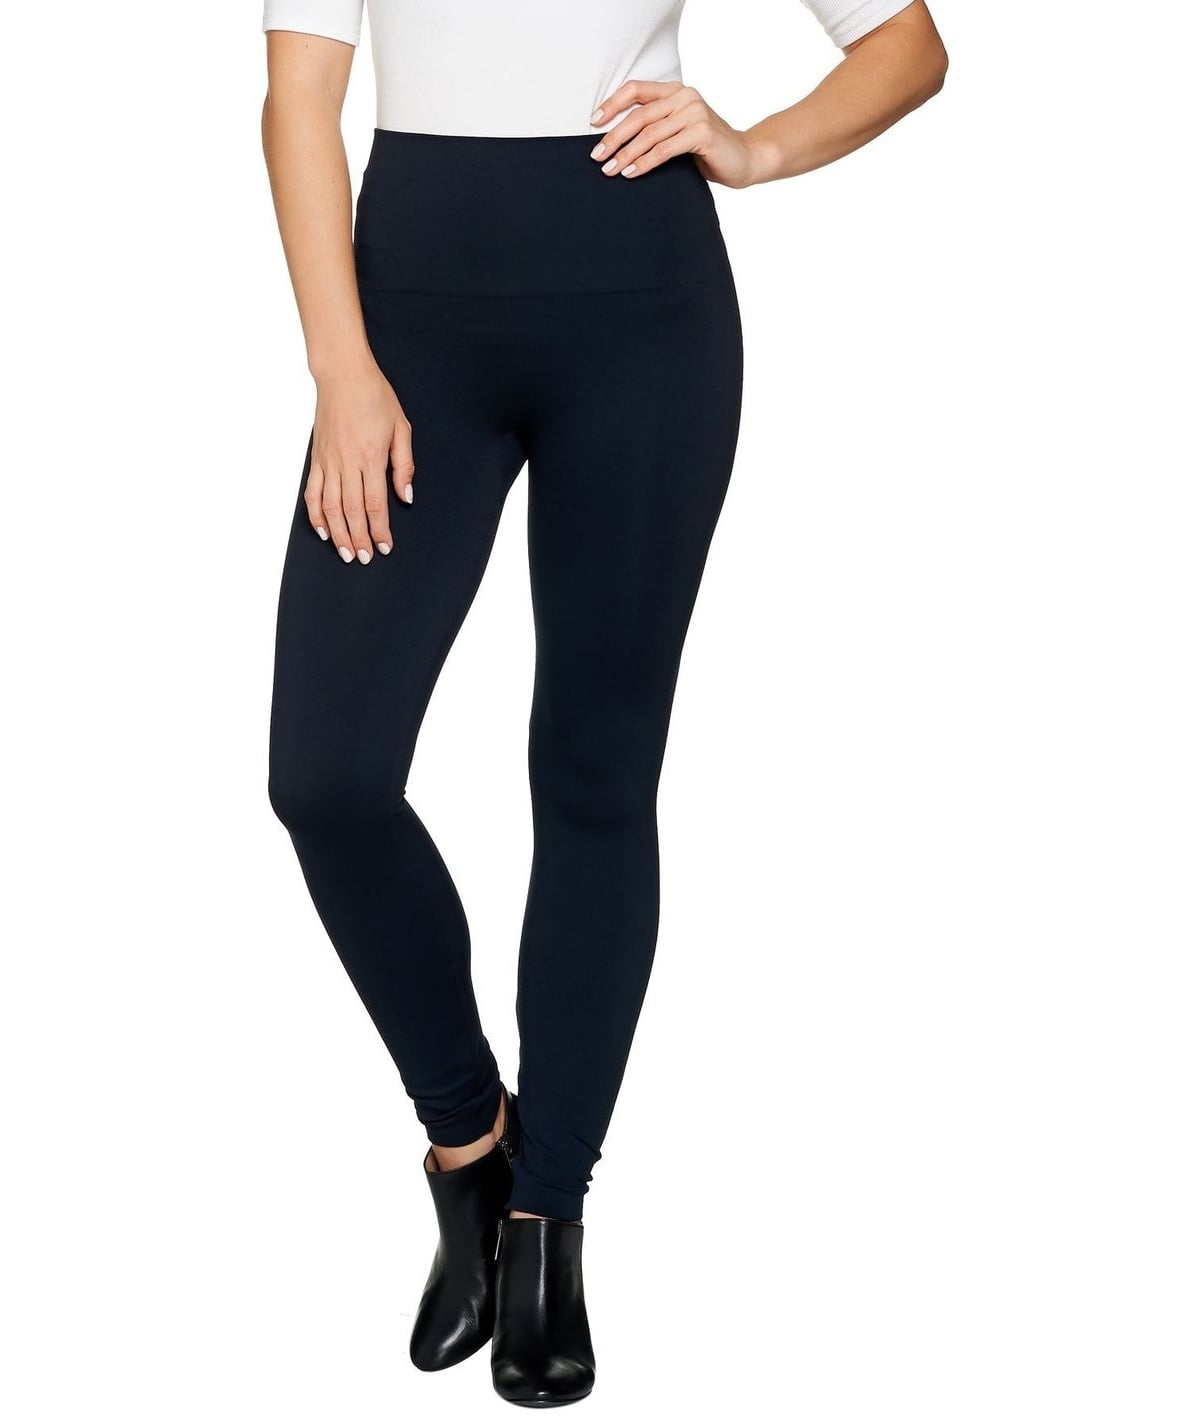 Spanx Look Me Now Seamless Leggings A288131 